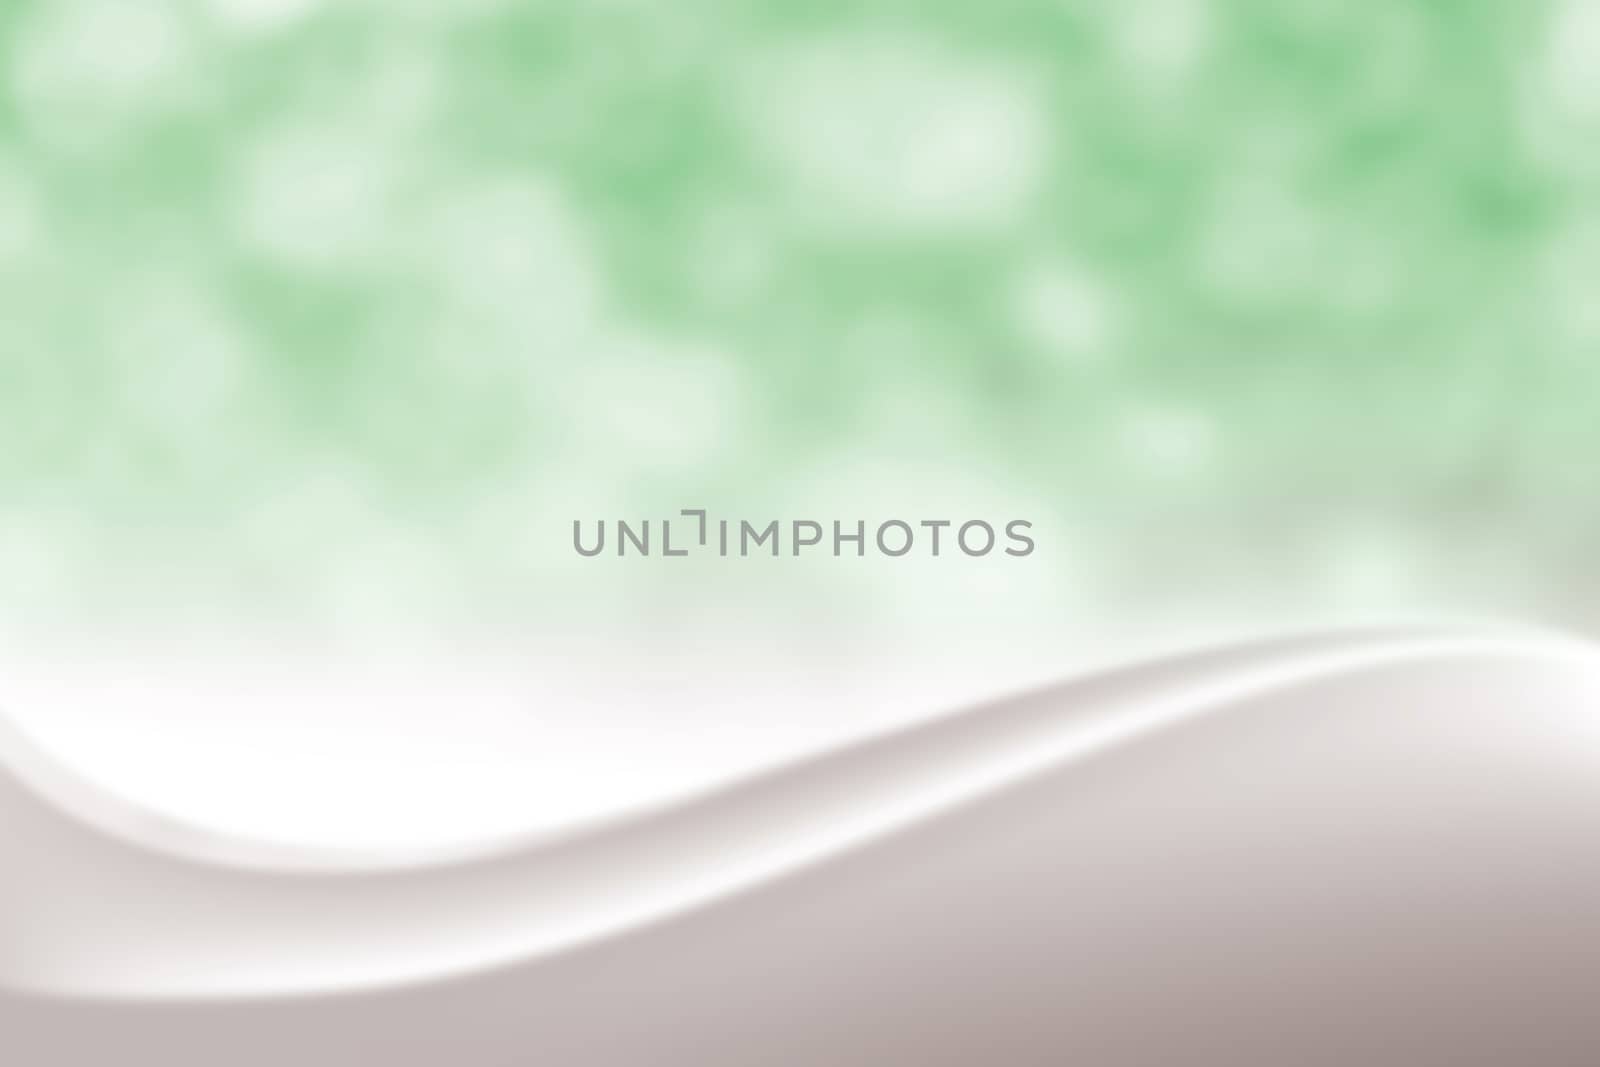 Blurred Smooth green elegant soft beauty background, Luxurious Cosmetic backdrop Bokeh soft light shade, Gradient color tone sweet petal blur style luxury Abstract blurry colorful smooth illustration by cgdeaw